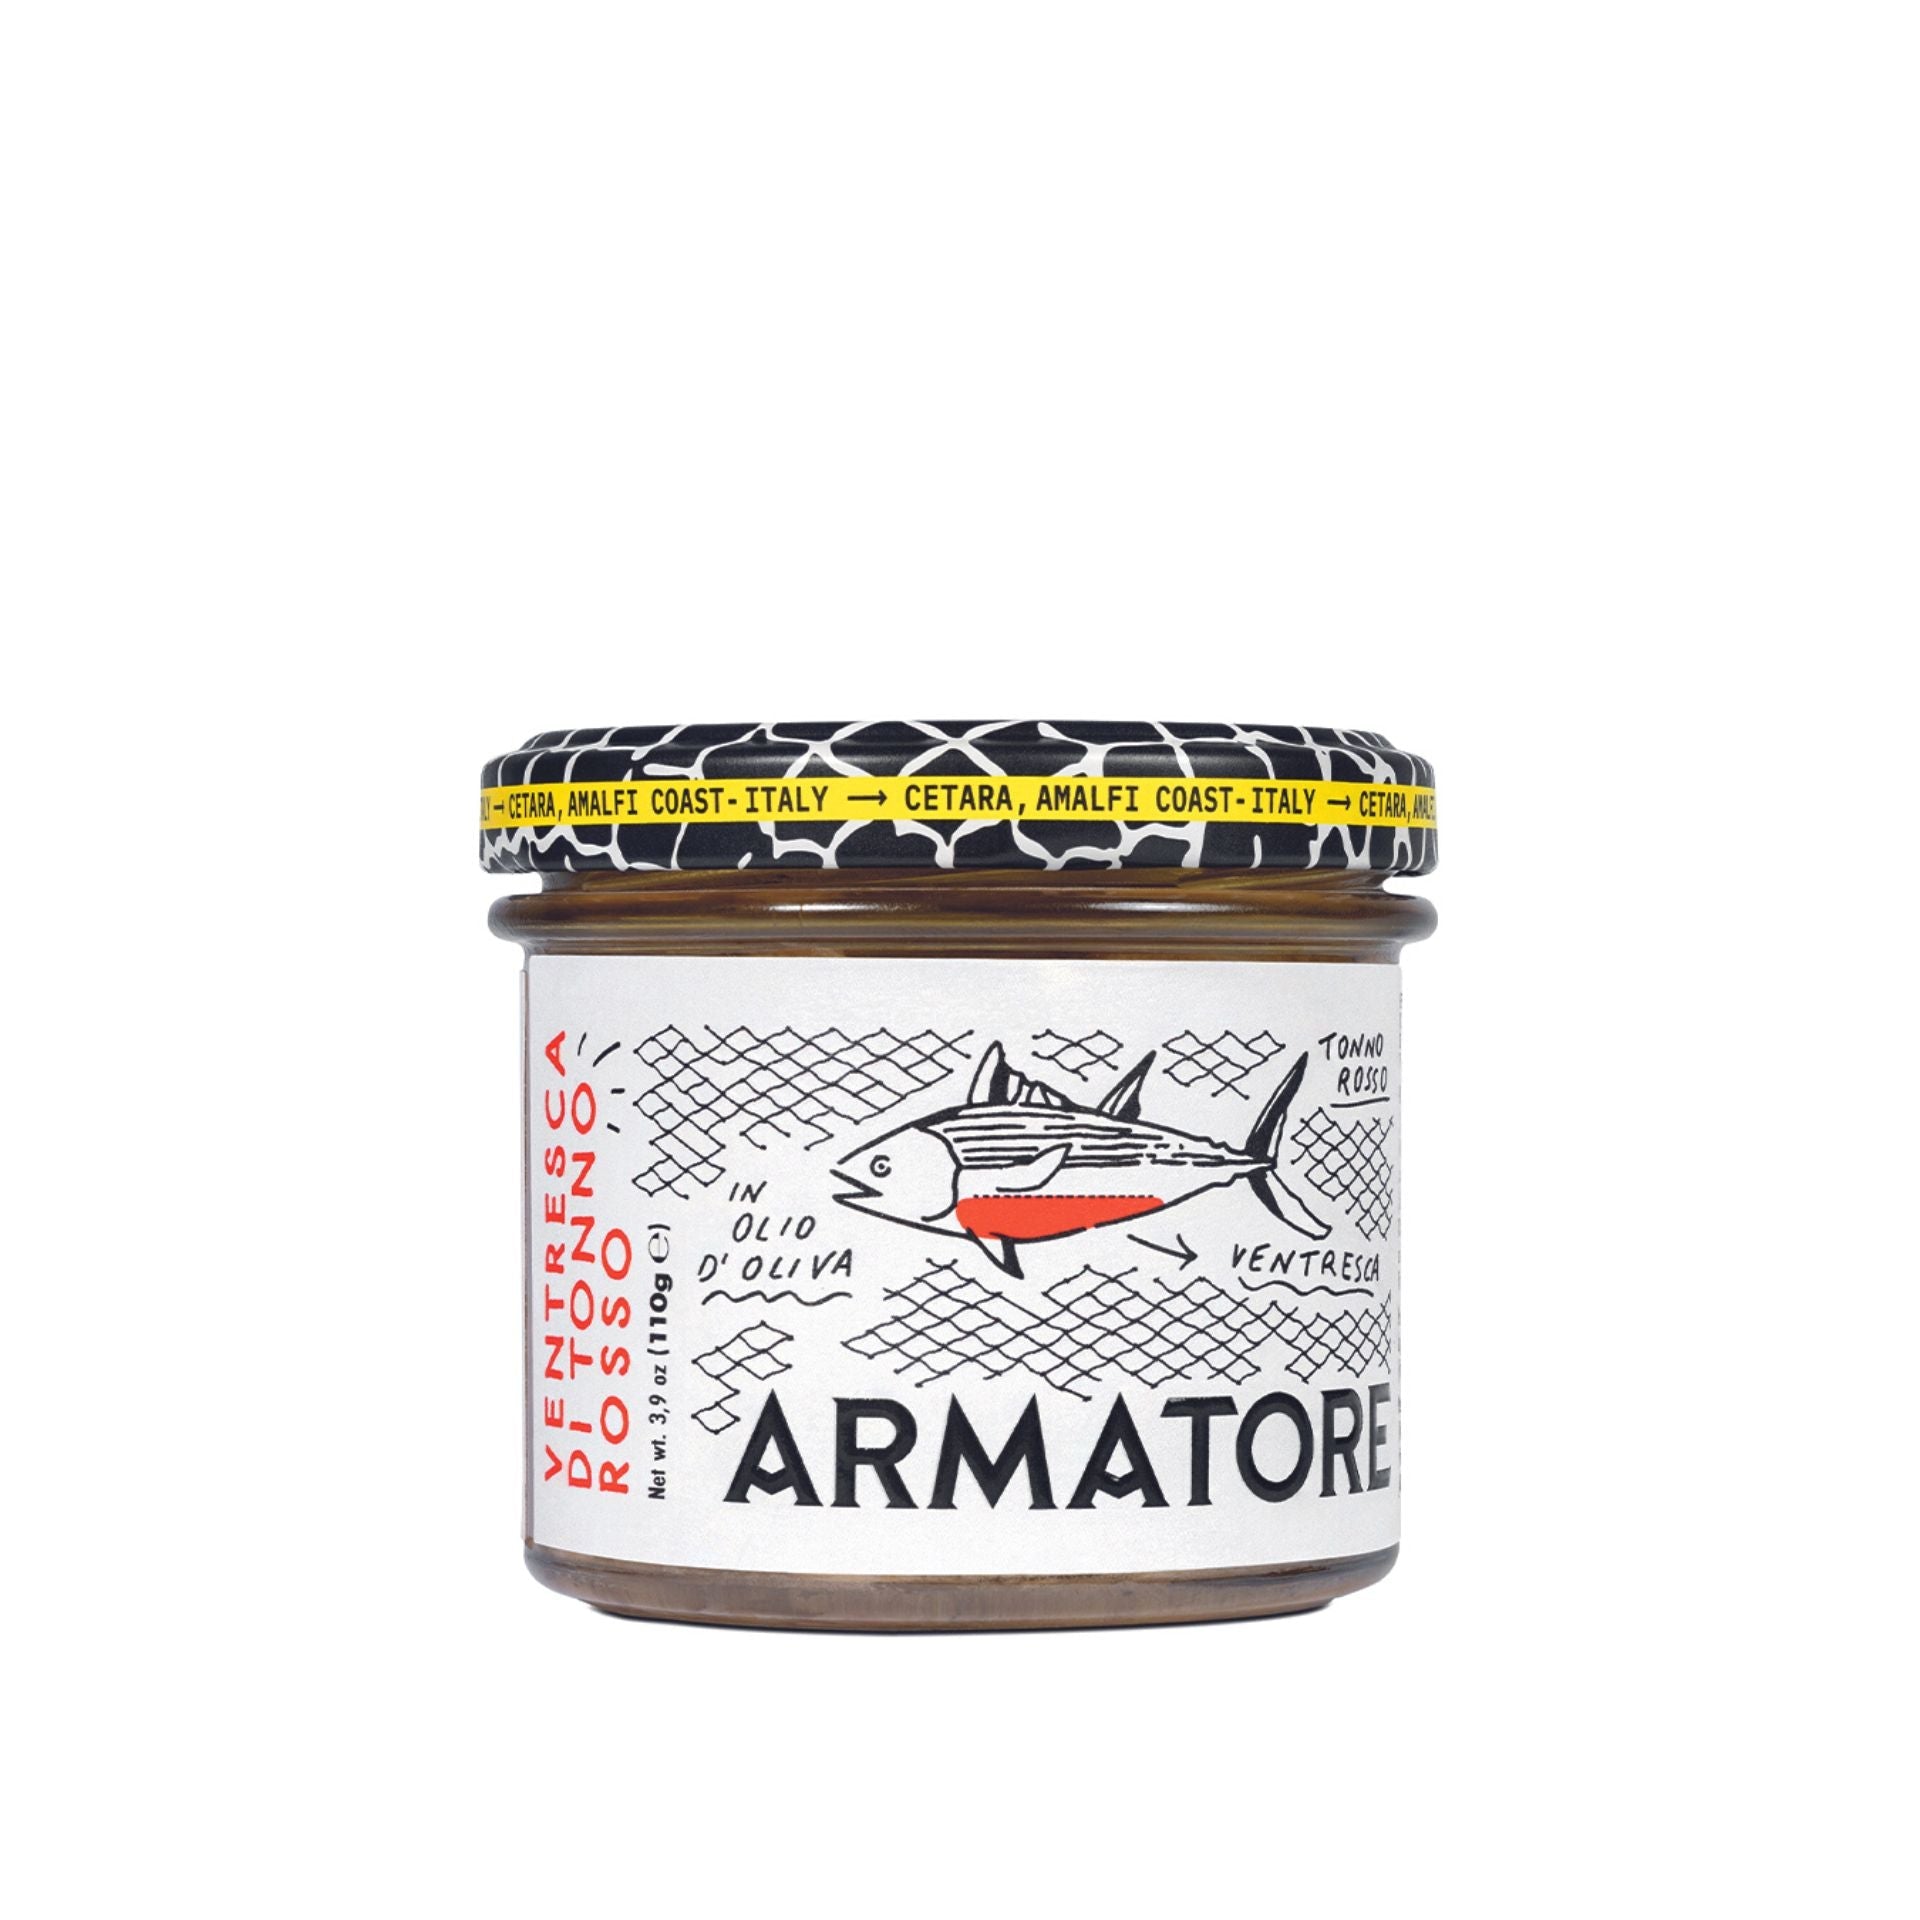 Armatore Bluefin Red Tuna Belly in Olive Oil 110g Feast Italy